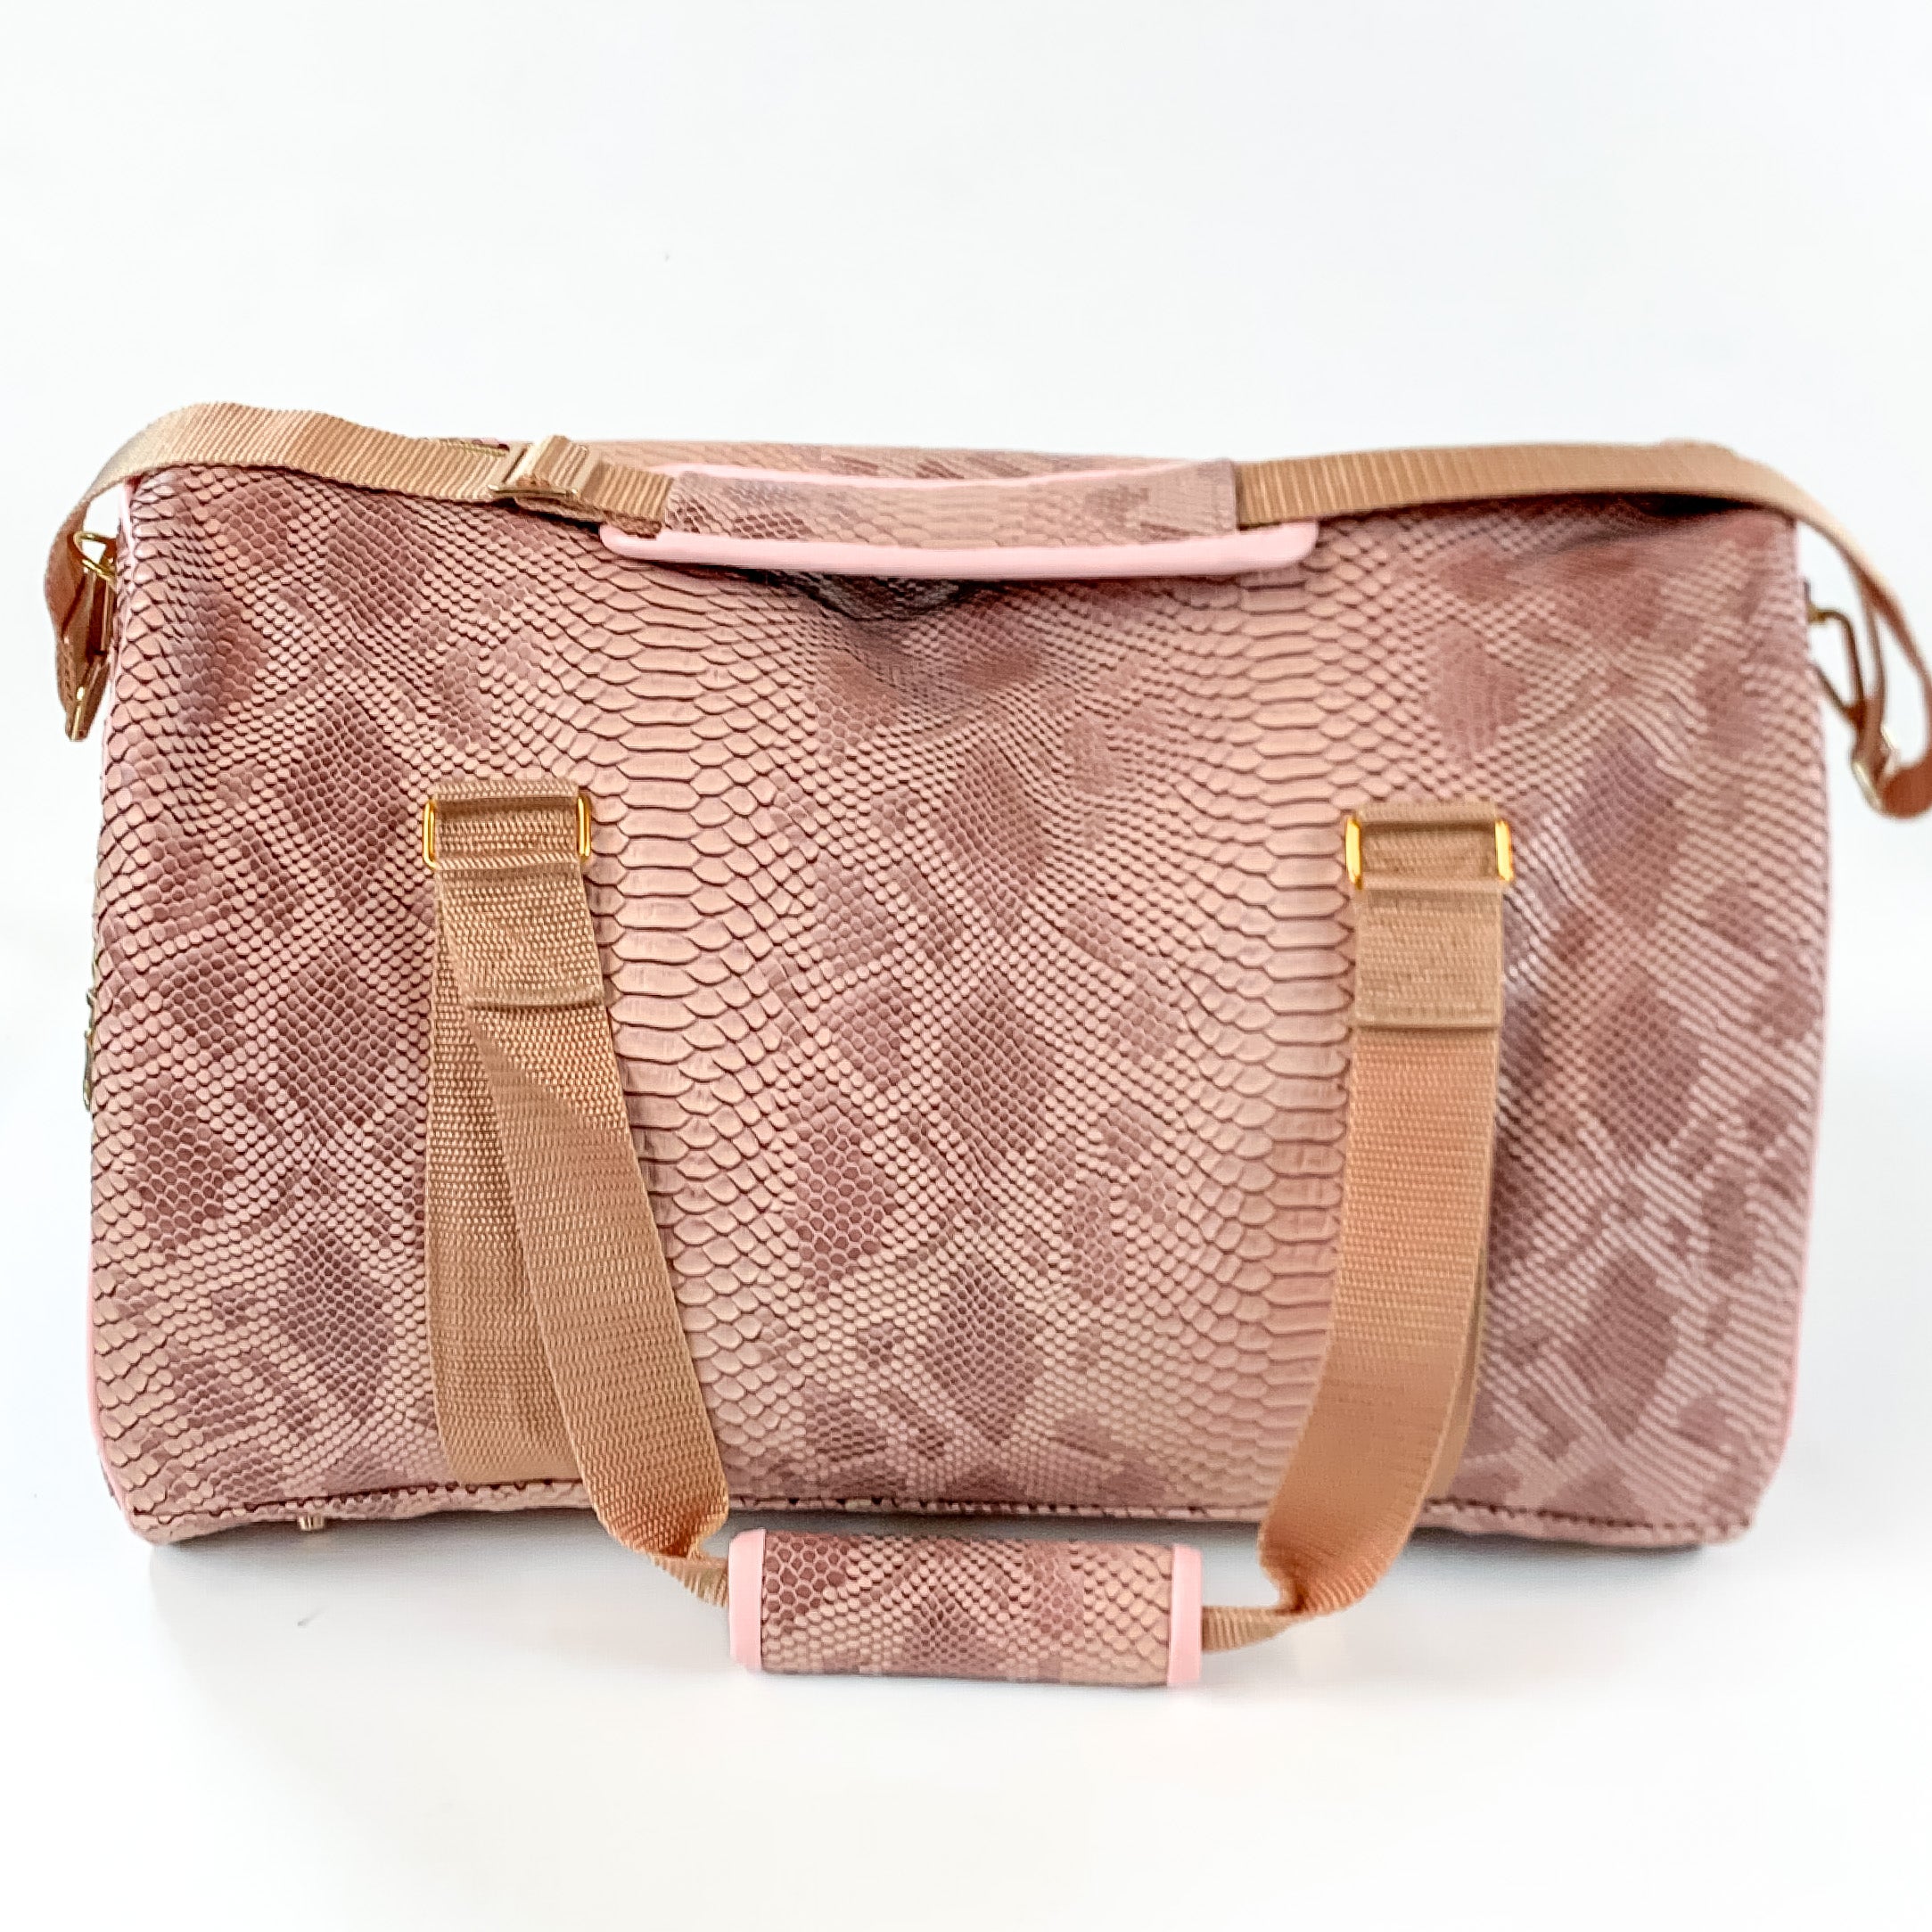 Makeup Junkie | Copperazzi Duffel Bag in Dusty Pink Snake Print - Giddy Up Glamour Boutique